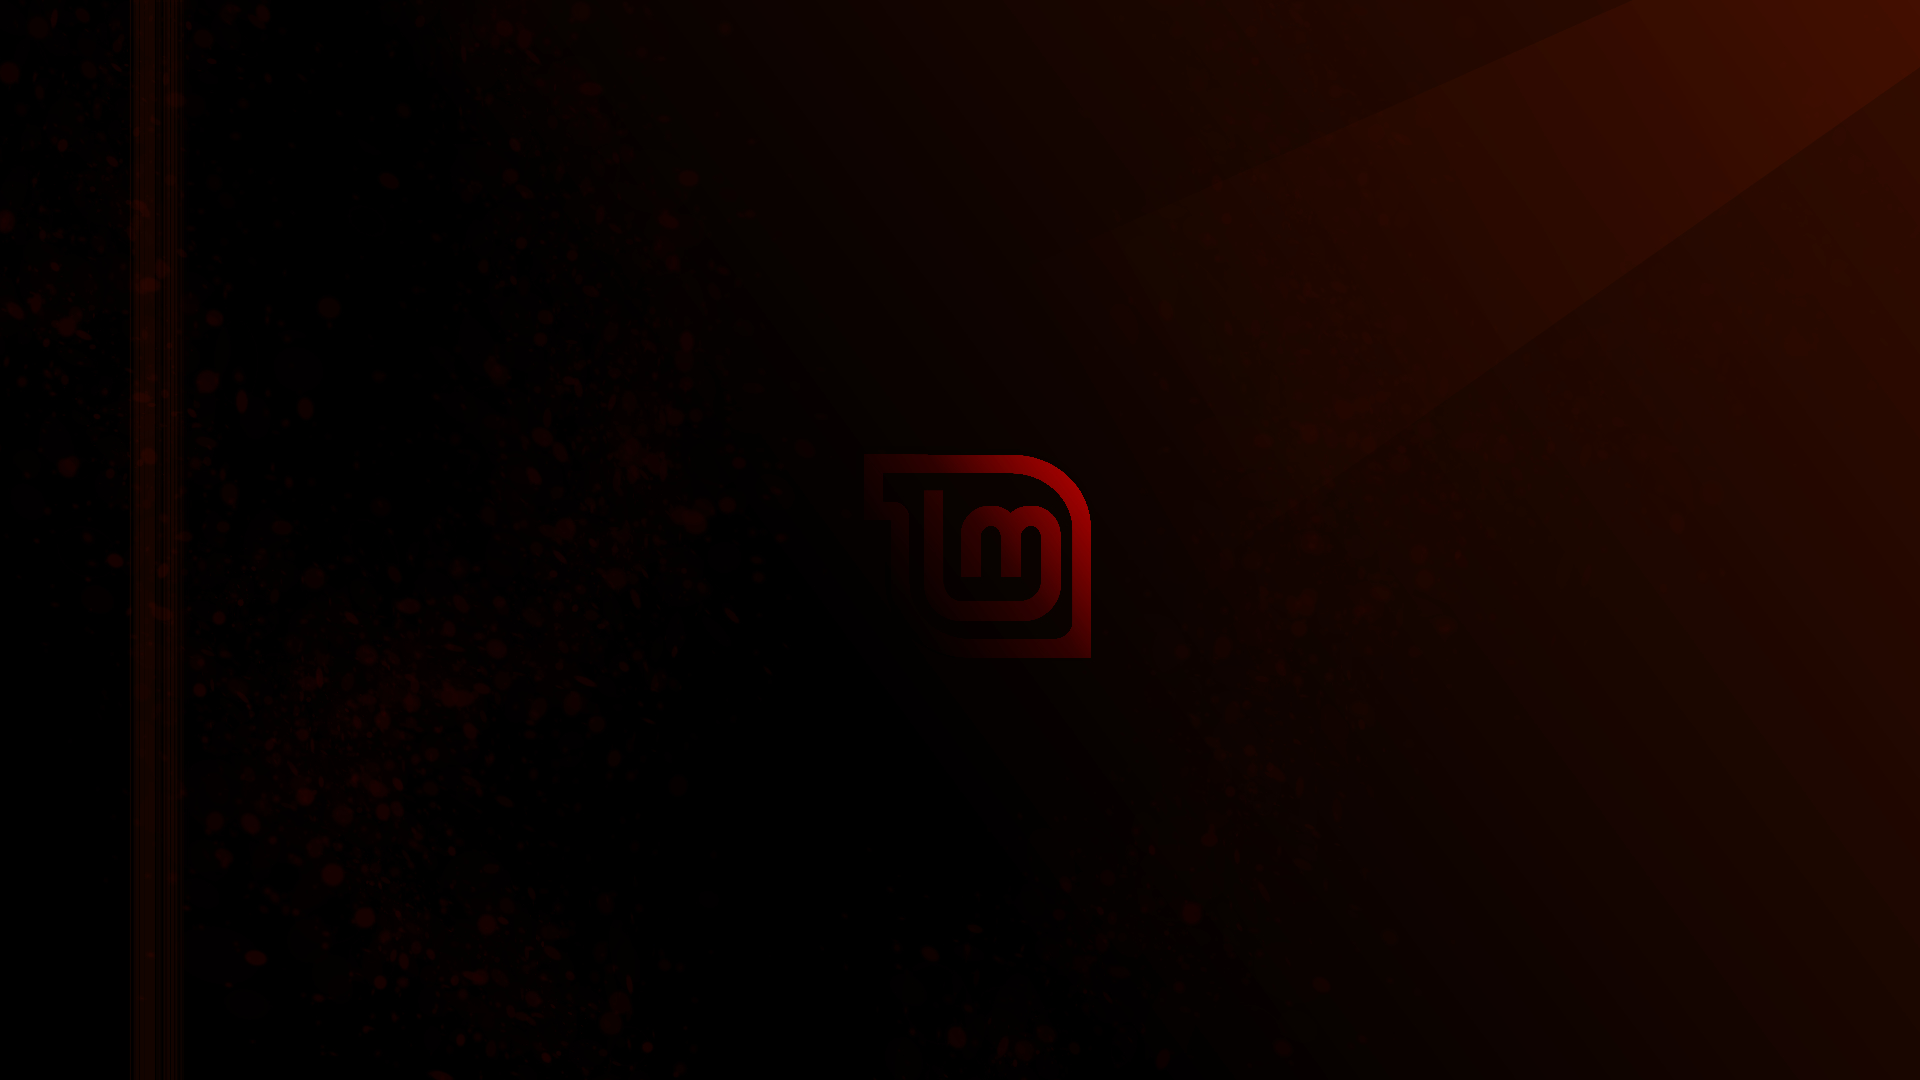 Wallpaper  Linux Mint abstract minimalism simple background 3840x2638   UnknownViolence  2202347  HD Wallpapers  WallHere